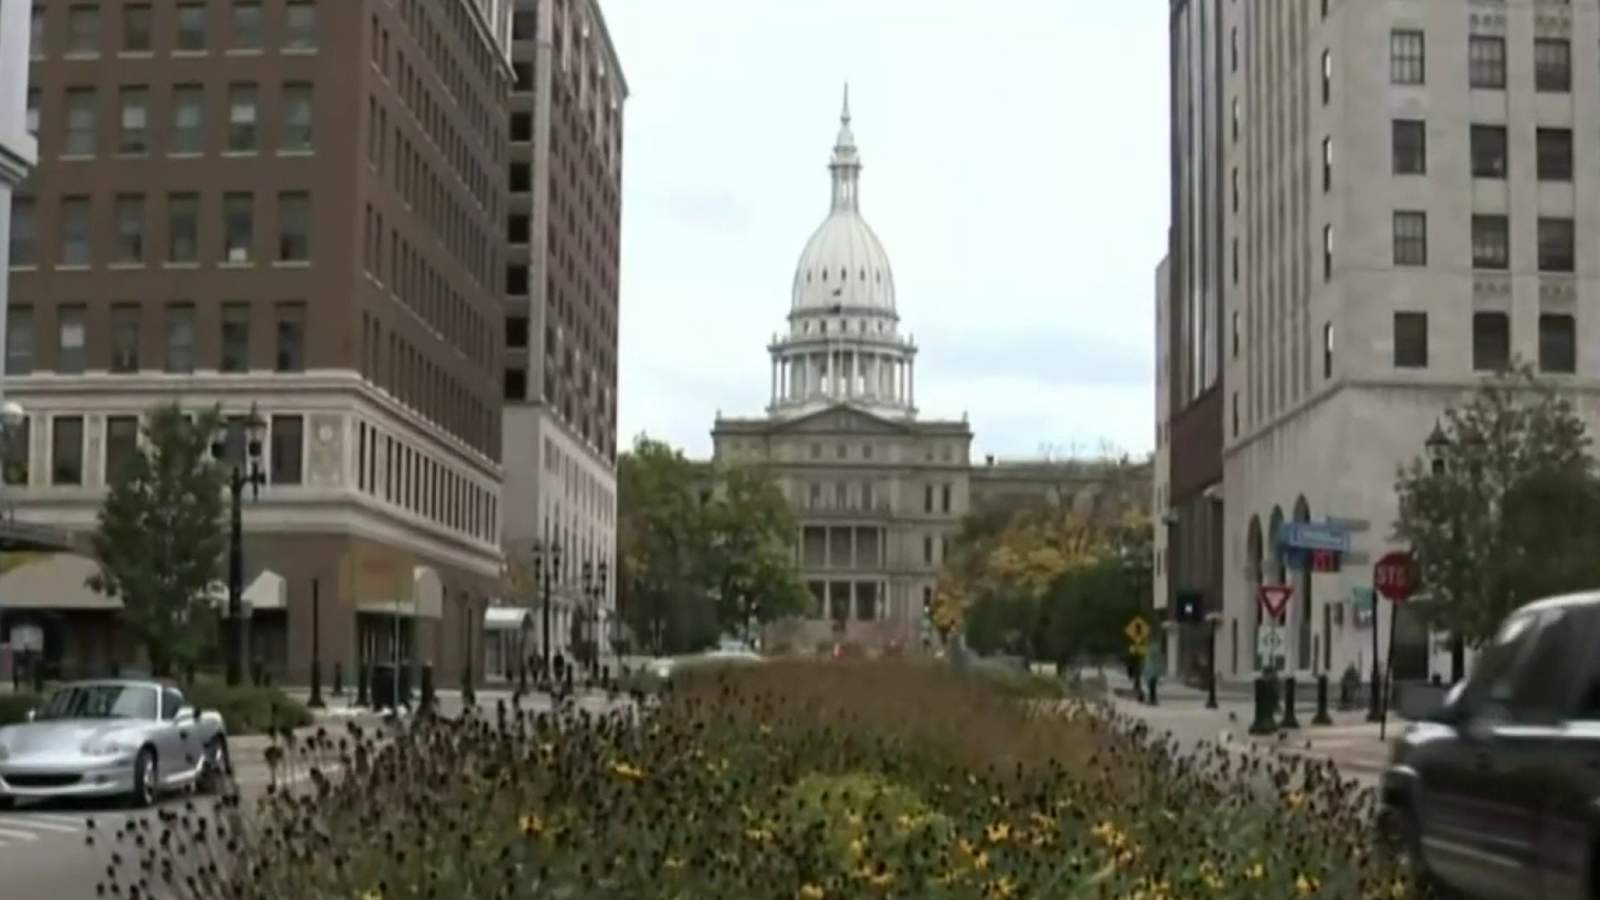 Michigan ‘Clean Slate’ plan could take years to implement